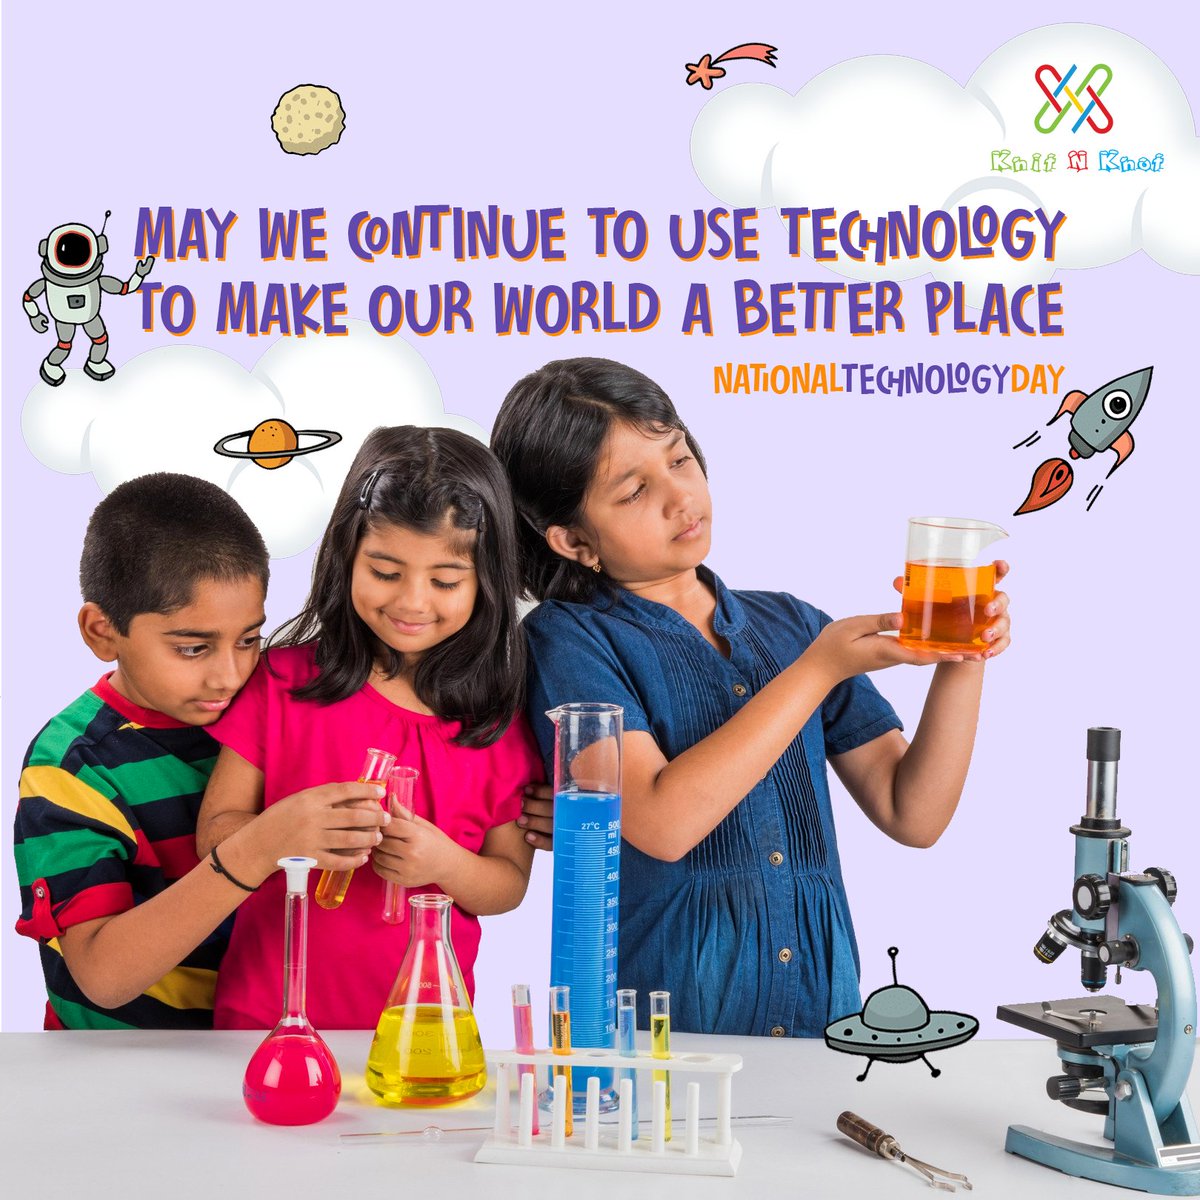 Technology brings along the promise of growth, development and advancement…. Wishing a very Happy National Technology Day! #TechnologyDay #NationalTechnologyDay #future #growth #kids #indianparents #indiankids #development #kidsdevelopment #growthparenting #knitnknot